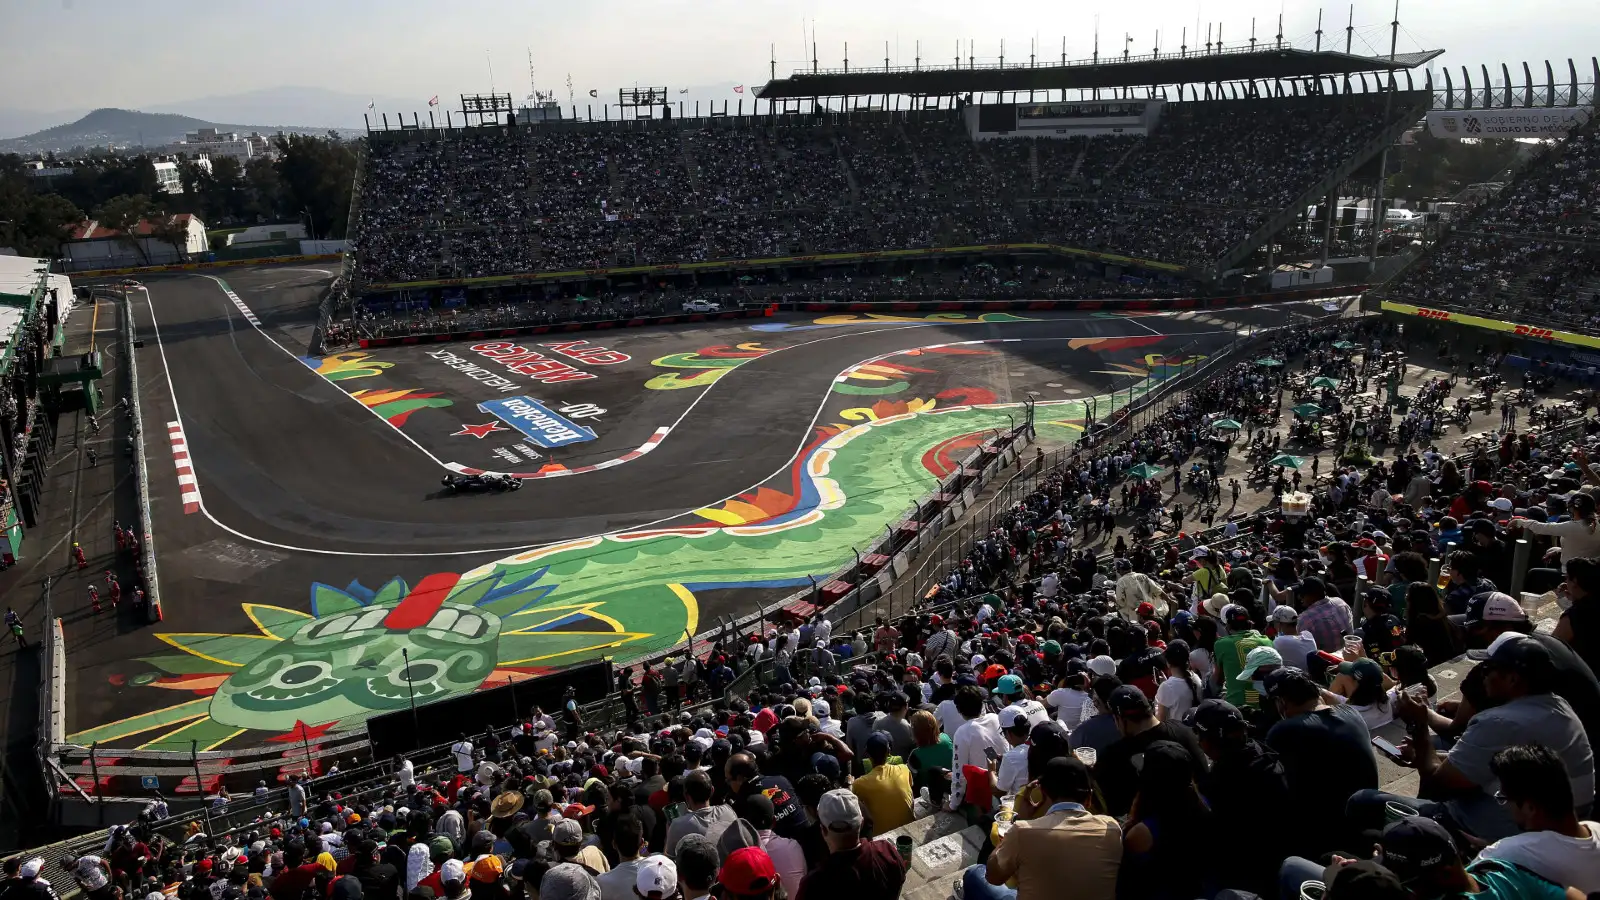 The crowd watching on in the stadium section at the Mexico City Grand Prix.